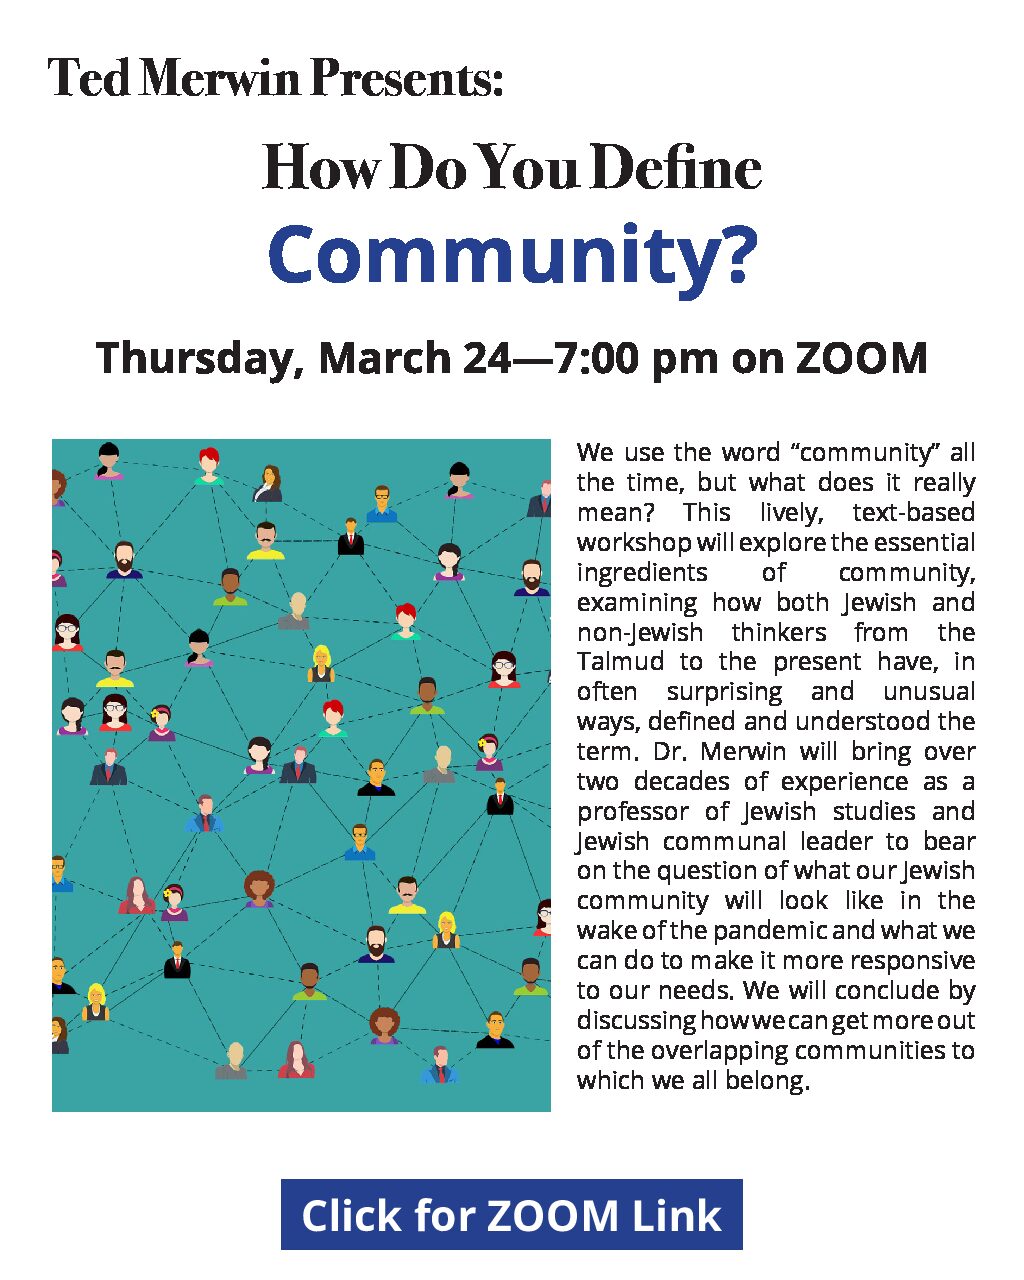 Ted Merwin Presents: HOW DO YOU DEFINE COMMUNITY?  Lecture on ZOOM